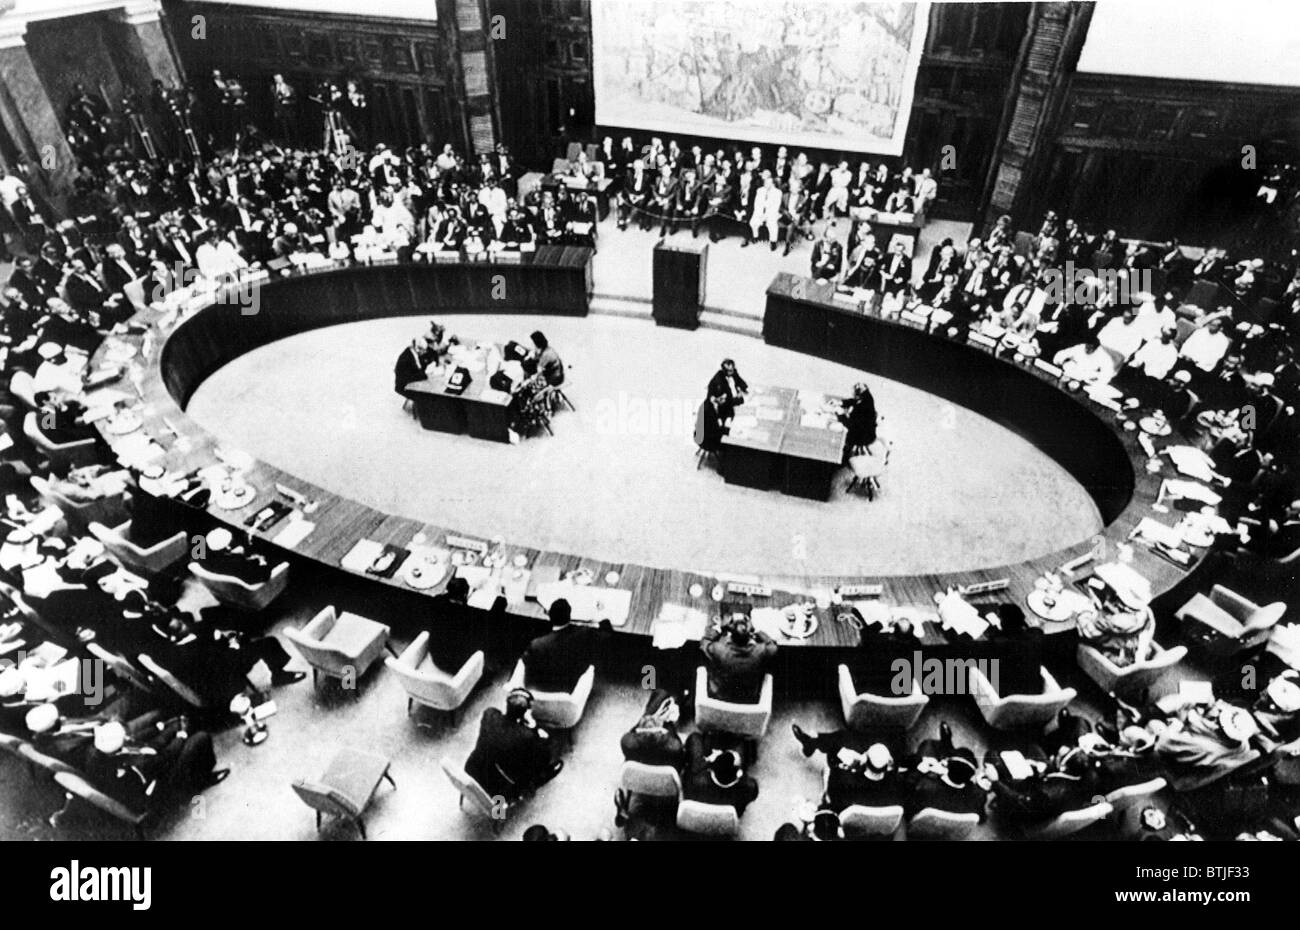 OPENING OF NEUTRALS' CONFERENCE, BELGRADE  YUGOSLAVIA: Overhead view of the conference of 24 unaligned nations in the Yugoslav p Stock Photo